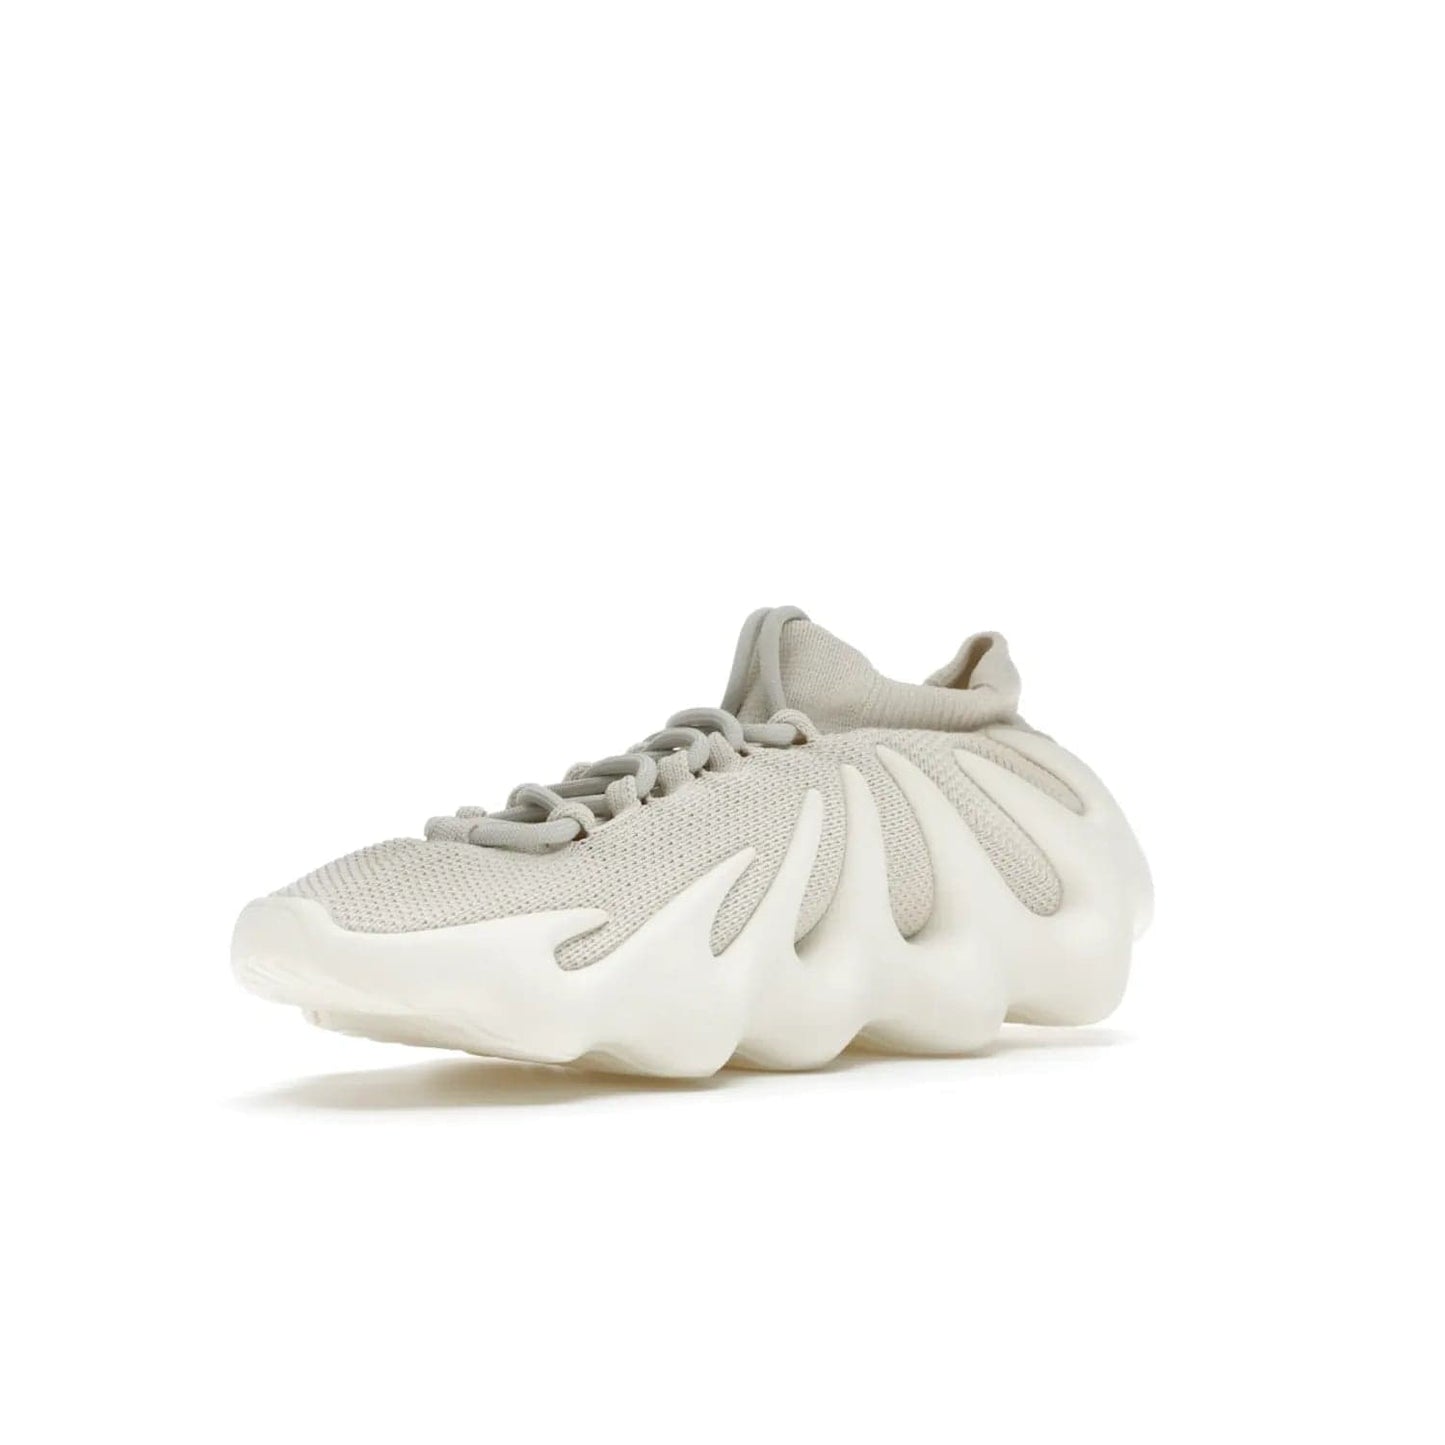 adidas Yeezy 450 Cloud White - Image 15 - Only at www.BallersClubKickz.com - Experience the future with the adidas Yeezy 450 Cloud White. A two-piece design featuring an extreme foam sole and mesh upper, this silhouette is expected to release in March 2021. Get your hands on this striking Cloud White/Cloud White colorway and stand out in the crowd.